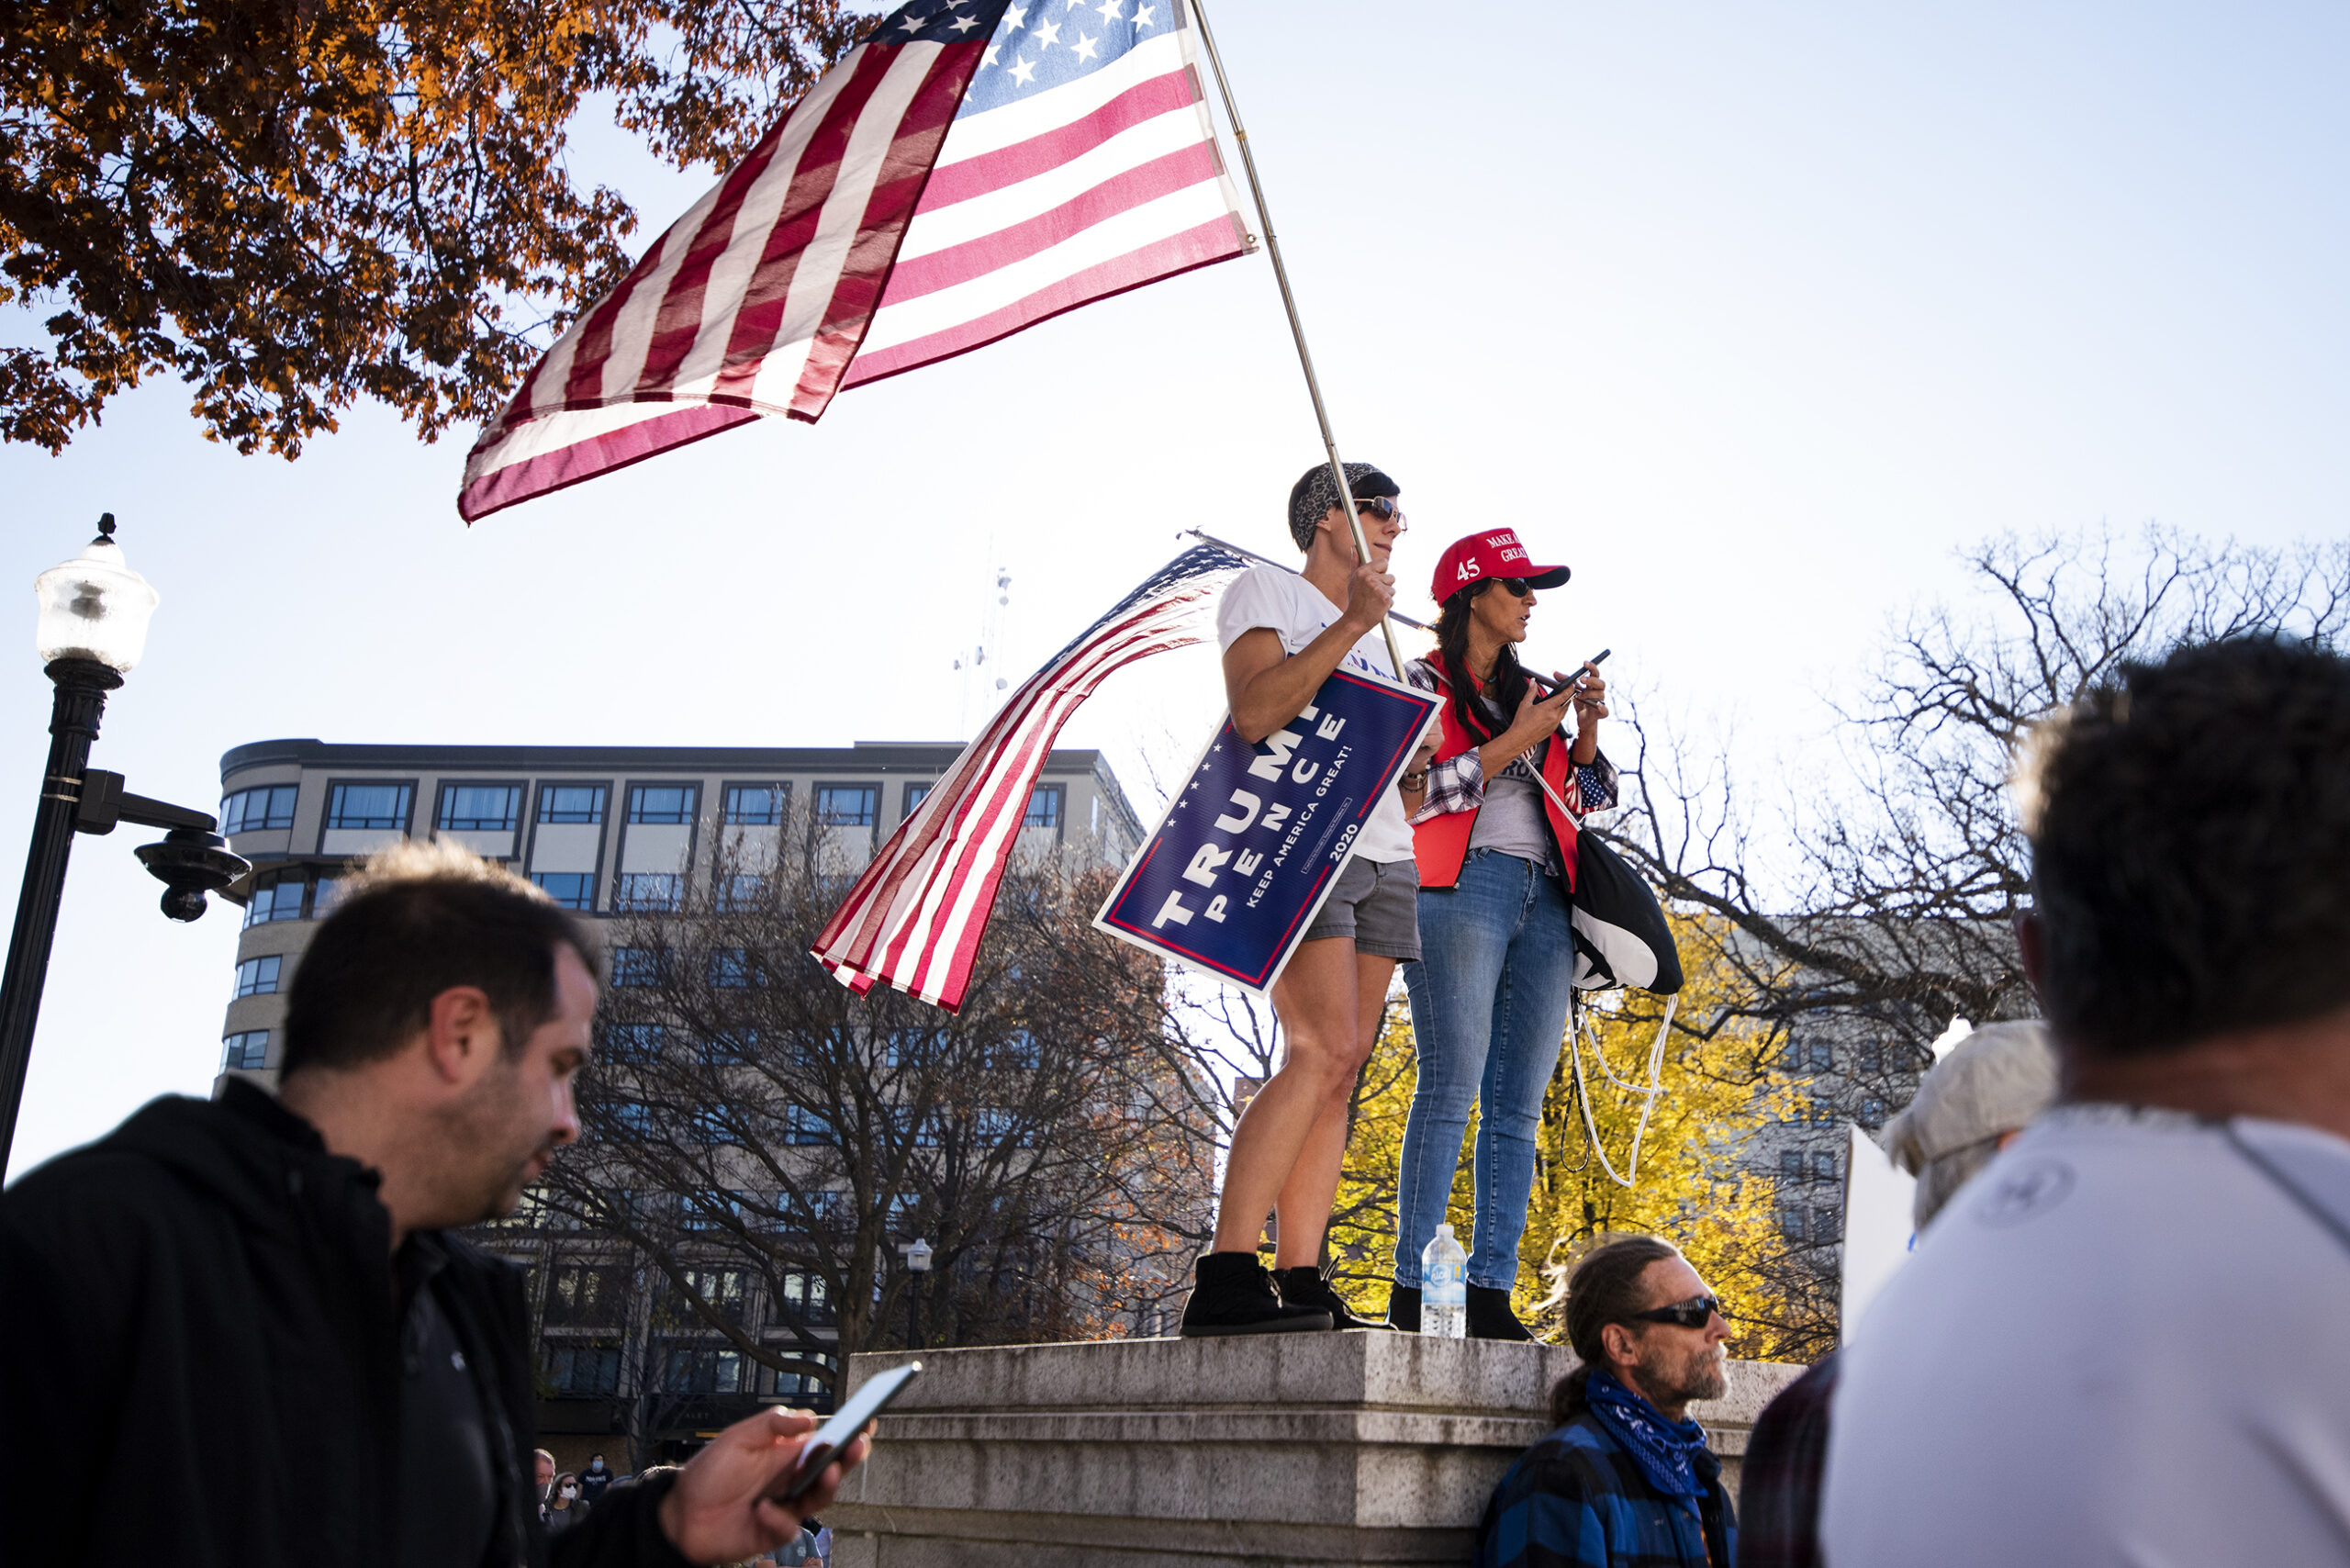 Trump supporters stand on a ledge holding Trump signs and U.S. flags